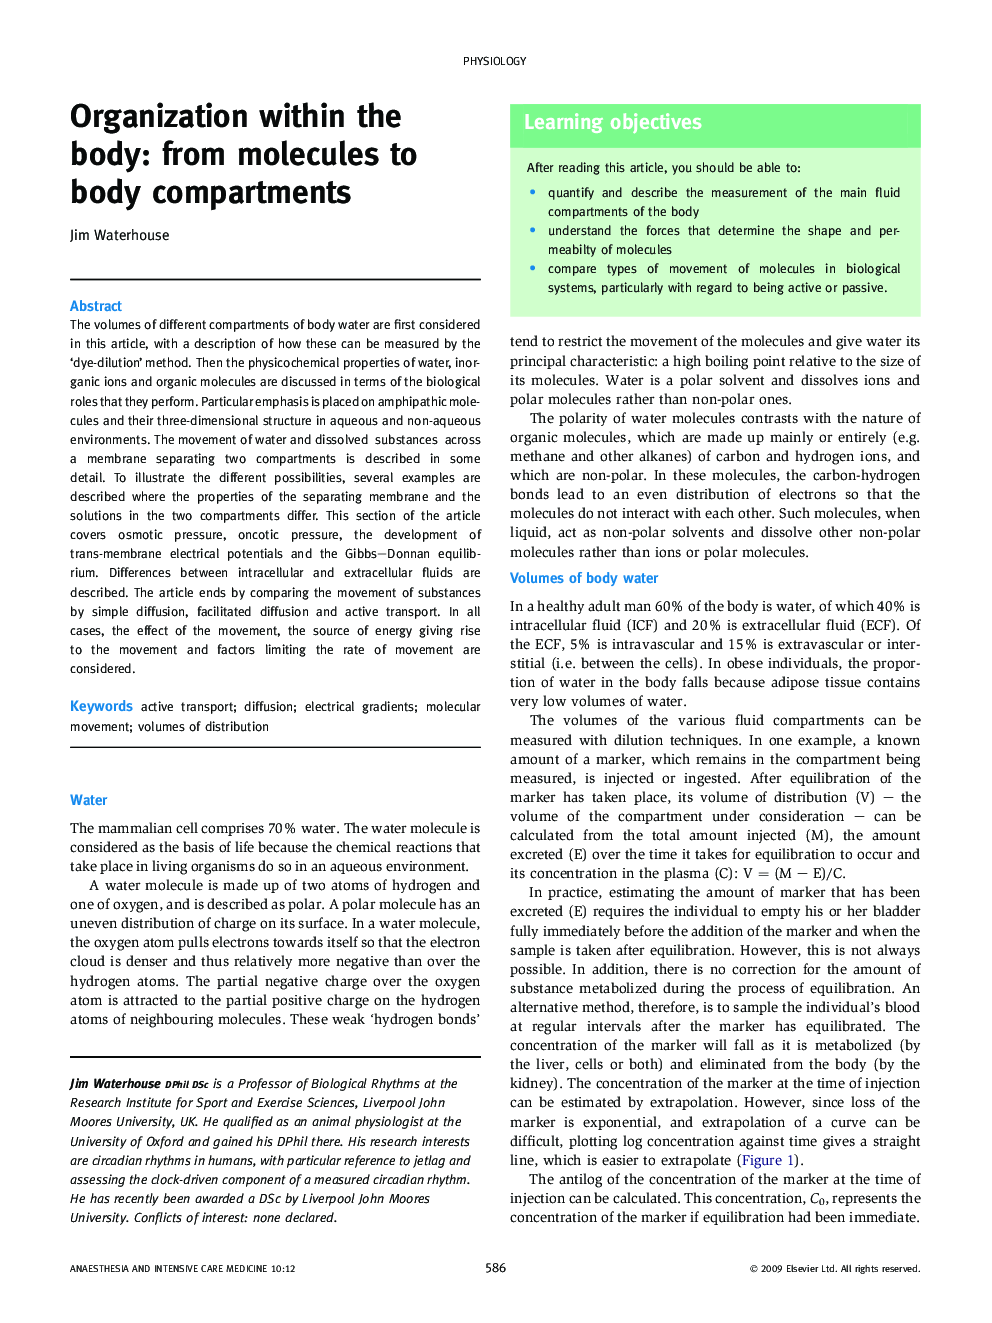 Organization within the body: from molecules to body compartments